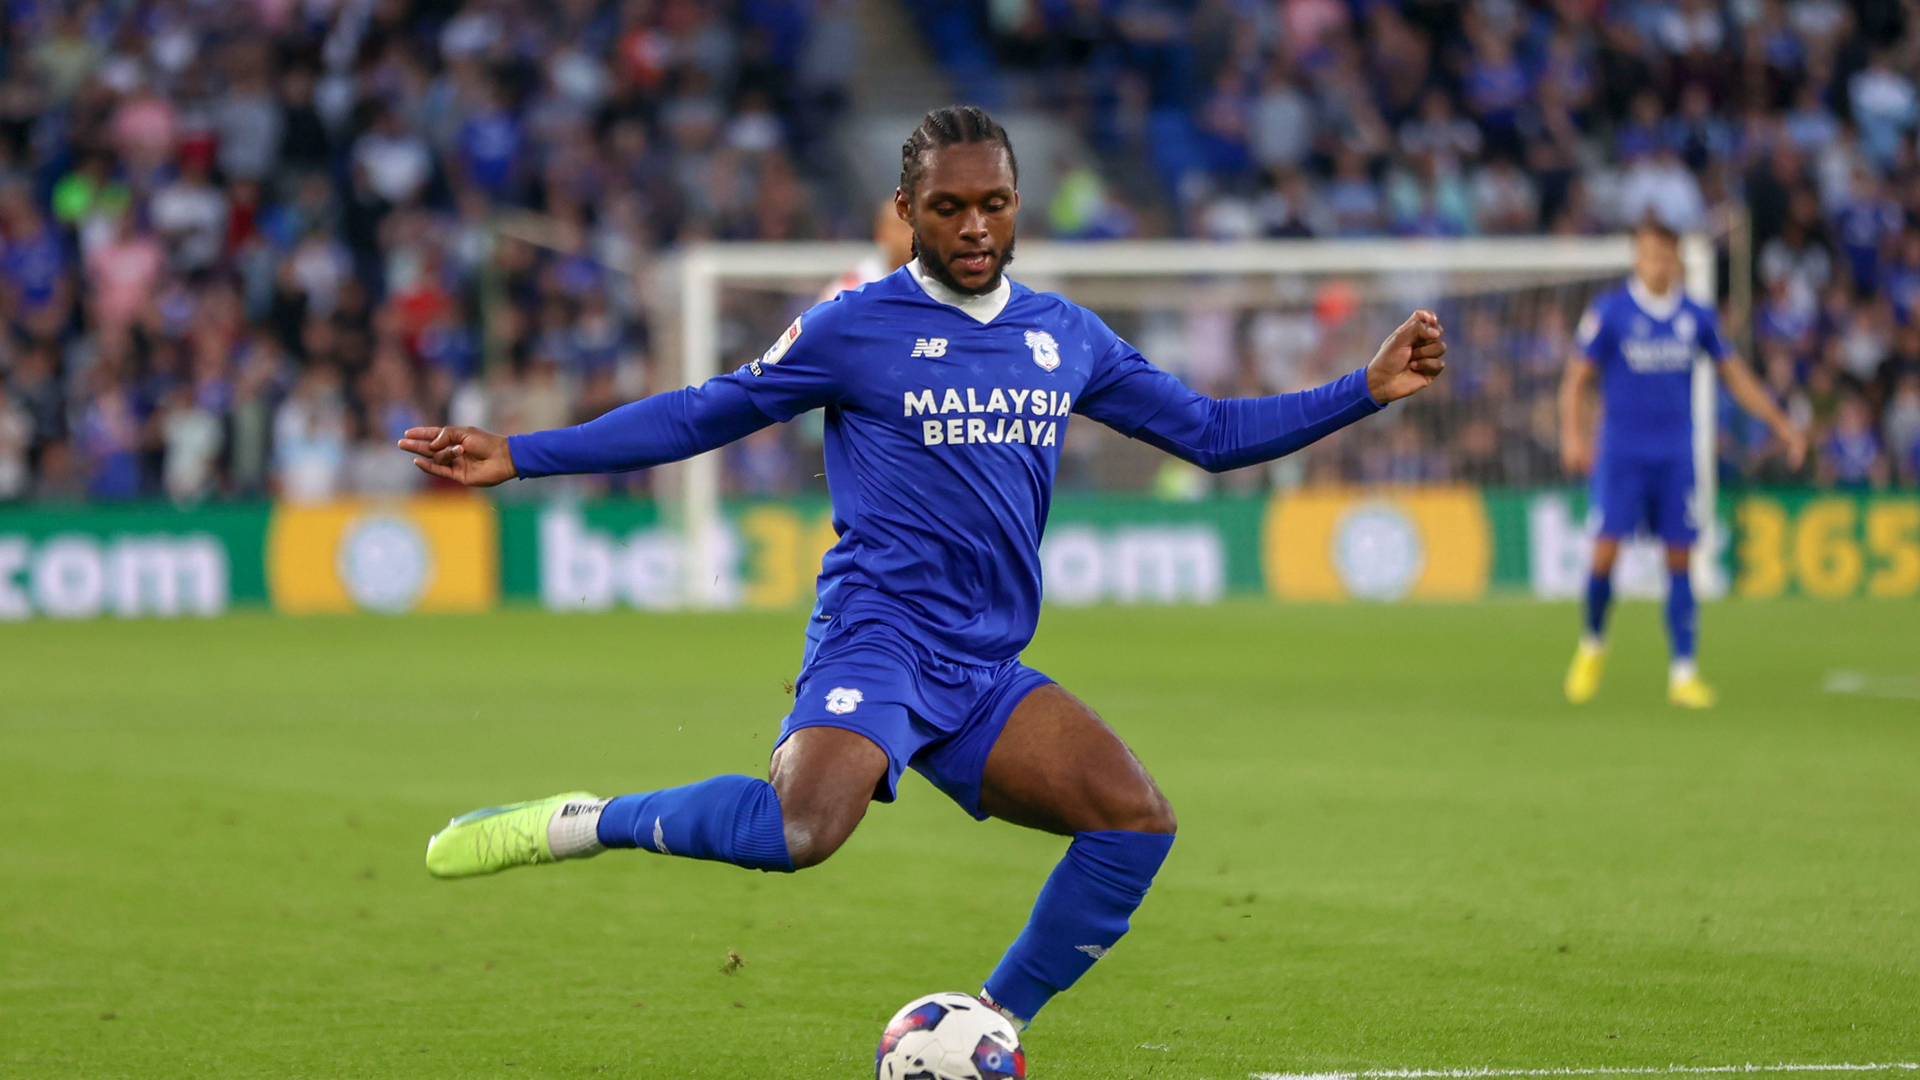 Cardiff City vs Millwall Prediction, Preview, And Betting Tips